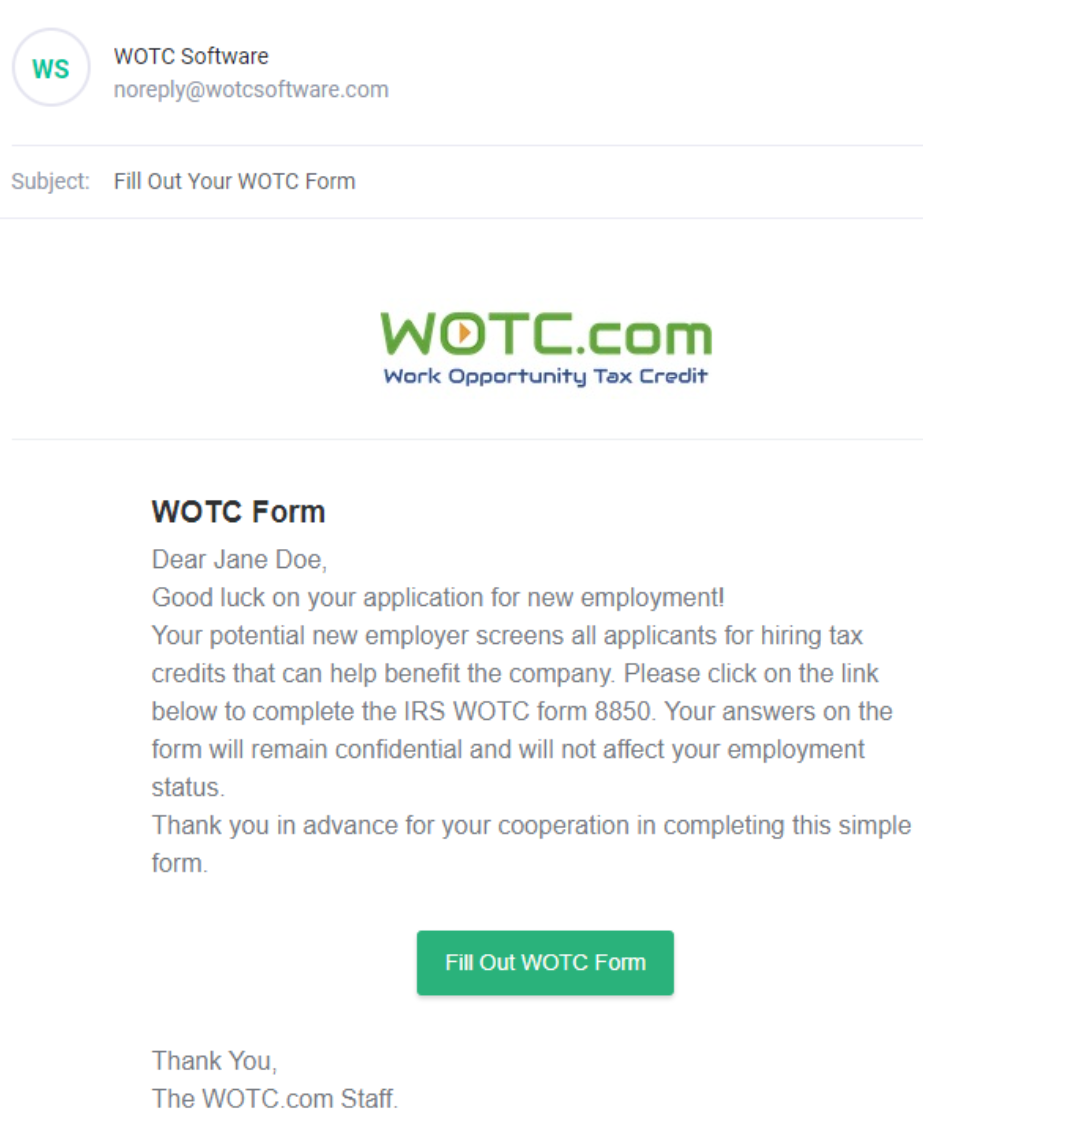 WOTC Form confirmation message sent to candidate with button to fill out WOTC form